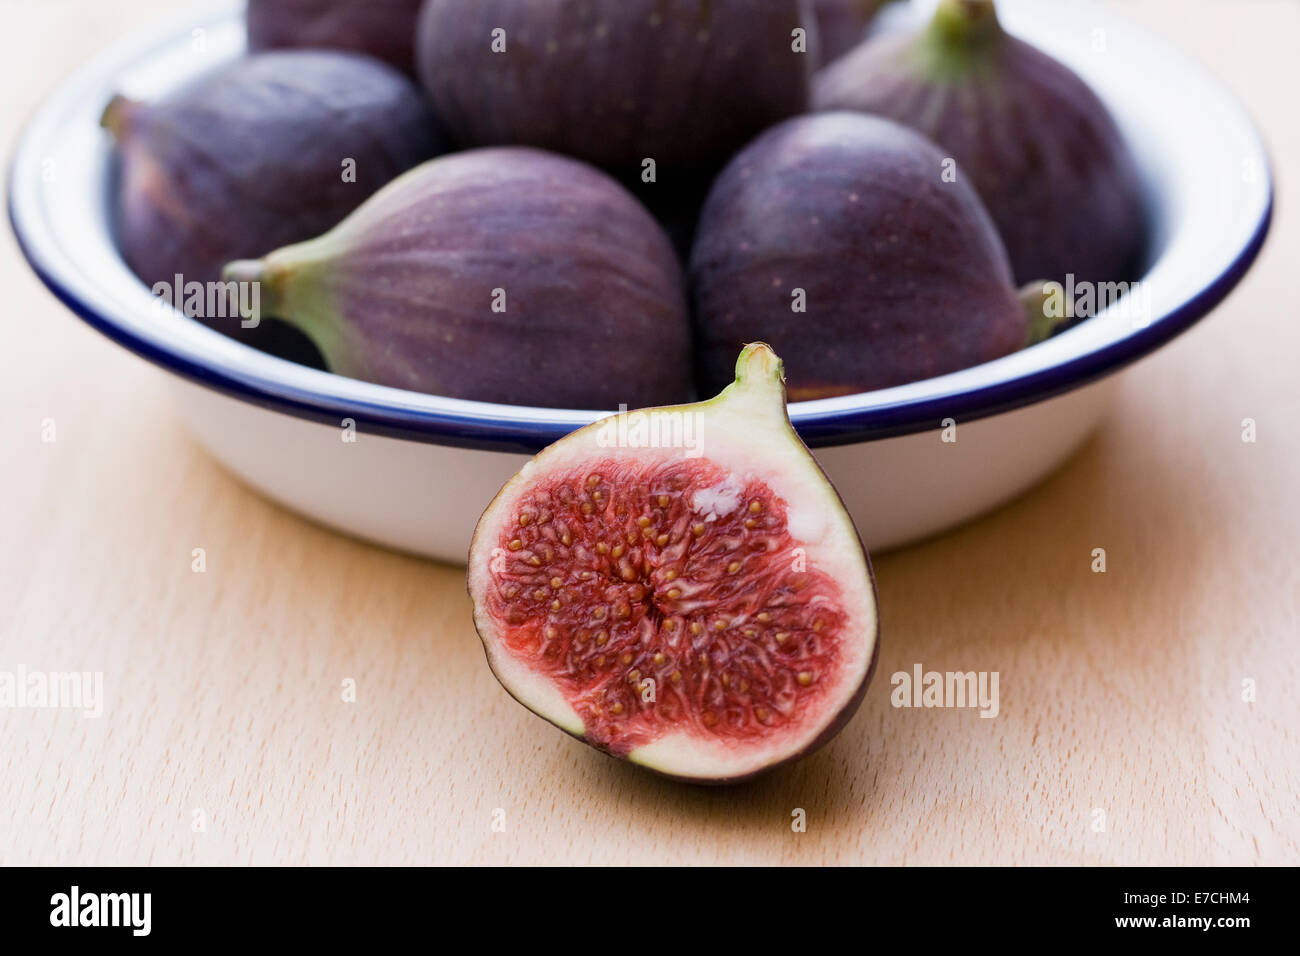 Ficus carica. Figs in an enamel dish on a wooden board. Stock Photo